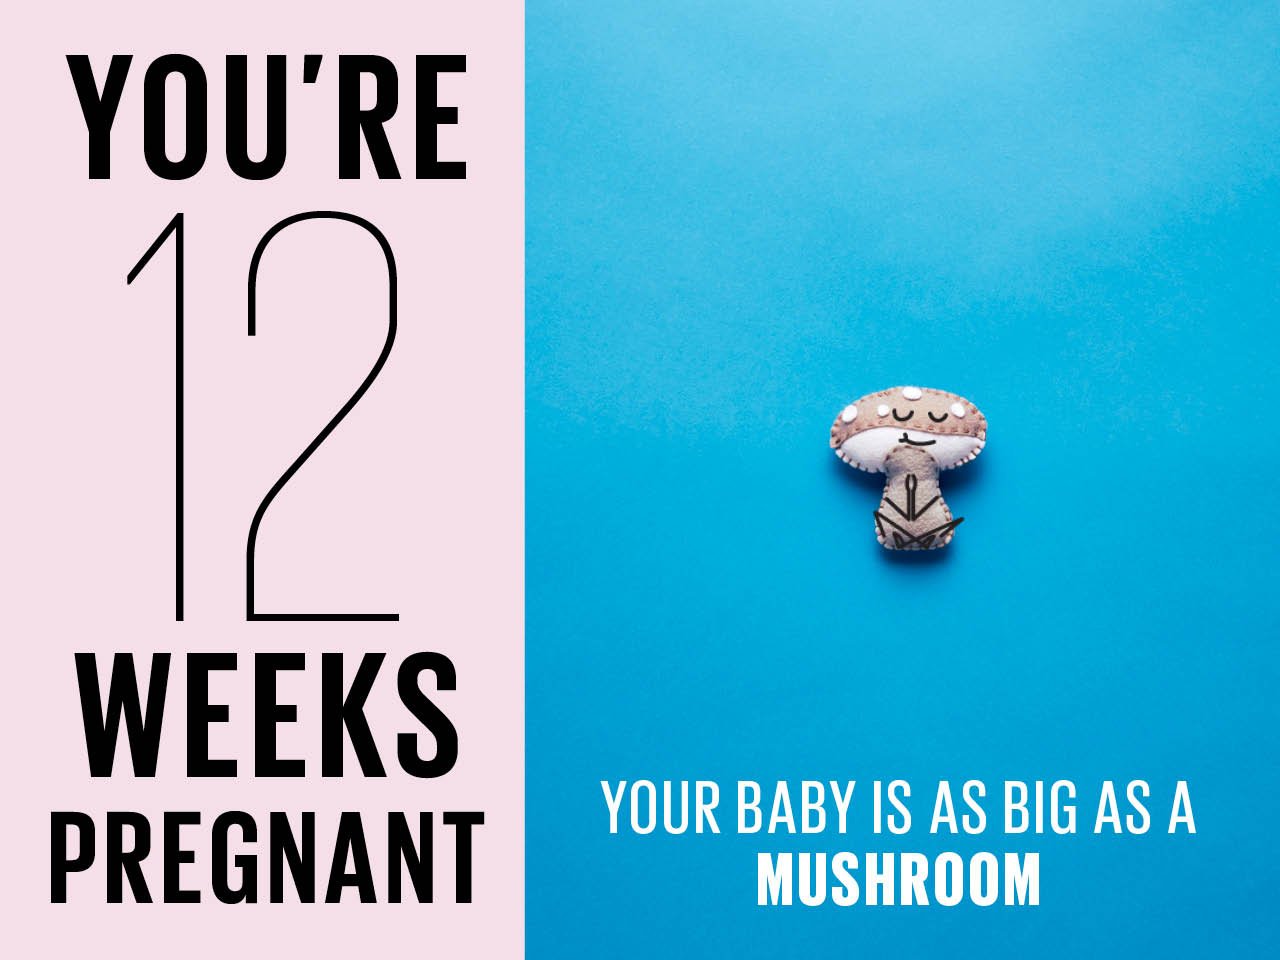 Felt mushroom used to show how big baby is at 12 weeks pregnant